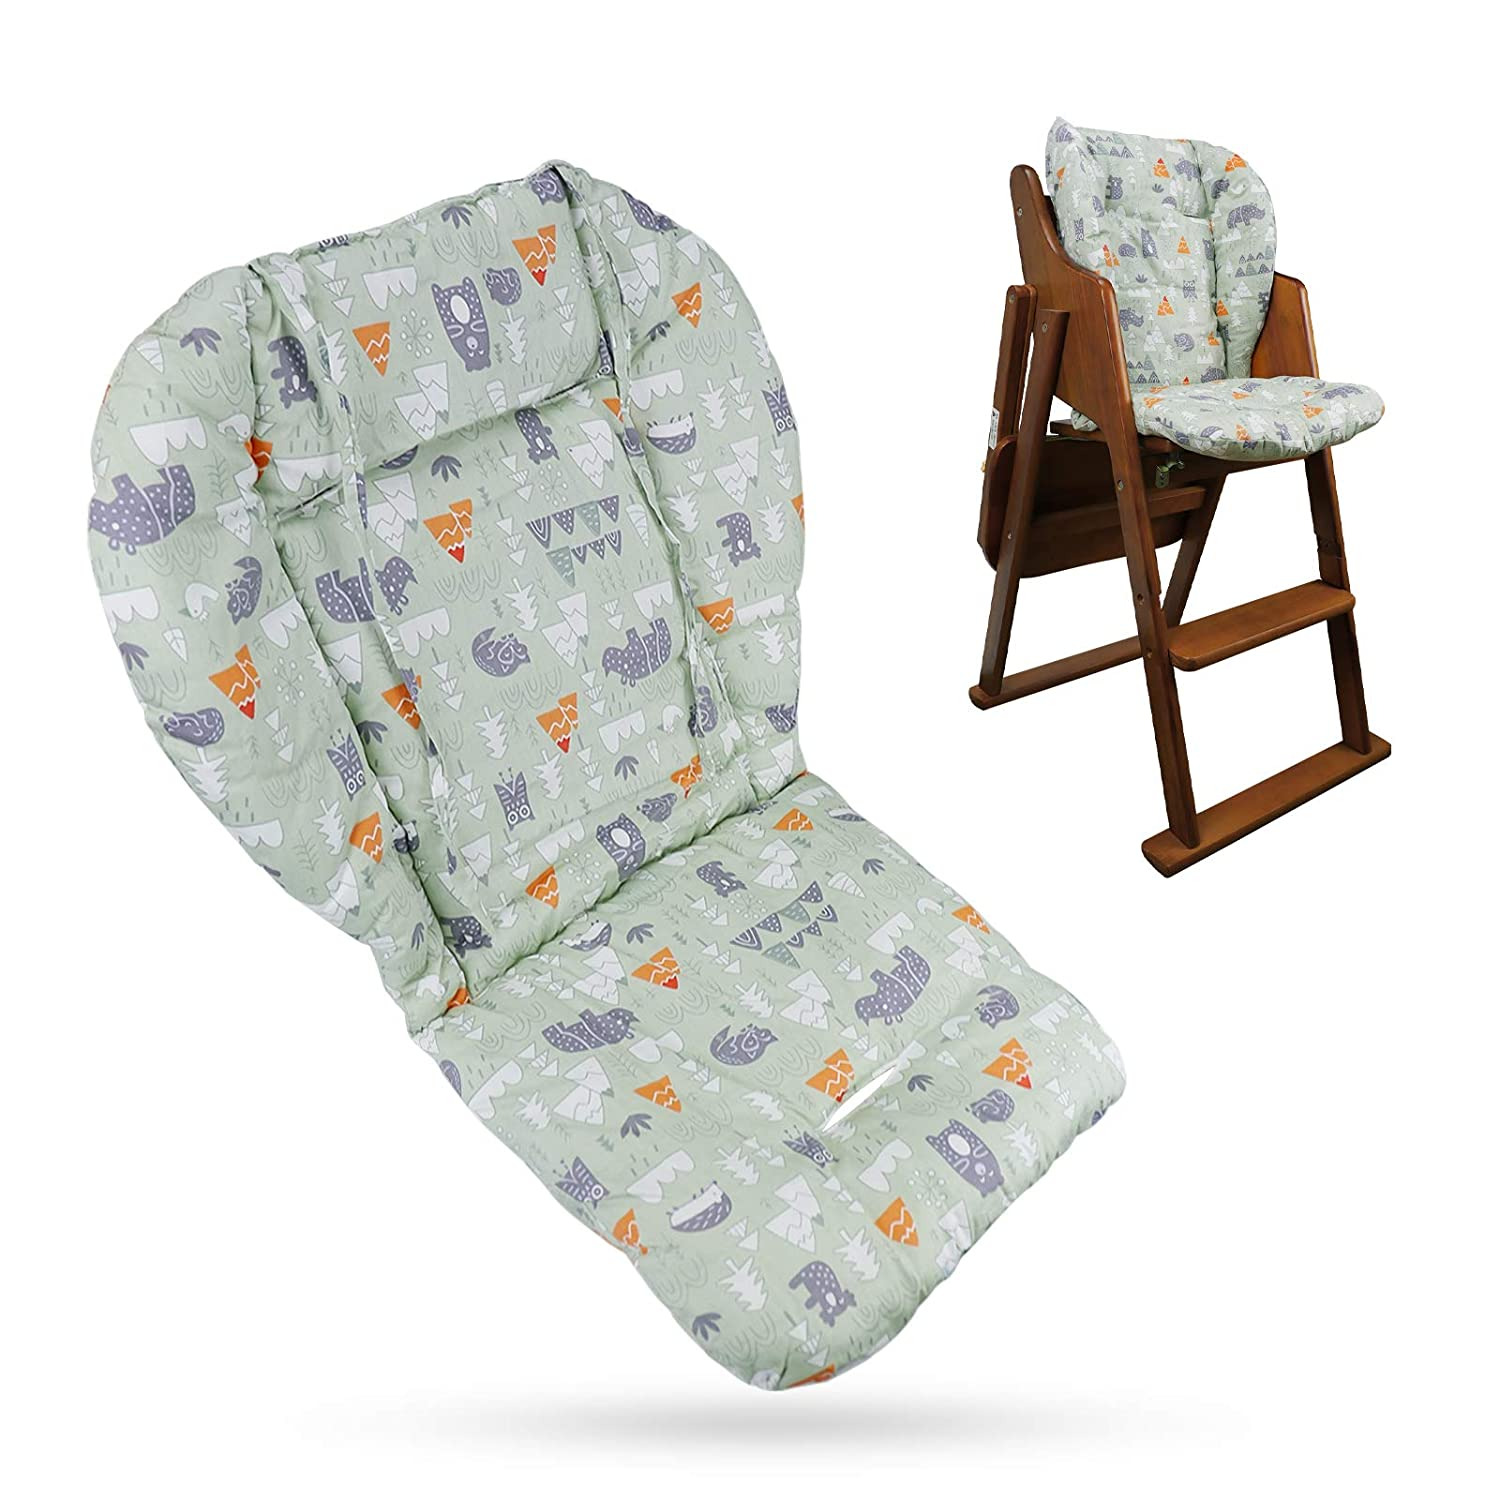 Baby High Chair Cushion, Thick Pad For Wooden High Chair, Baby Dining Chair Line